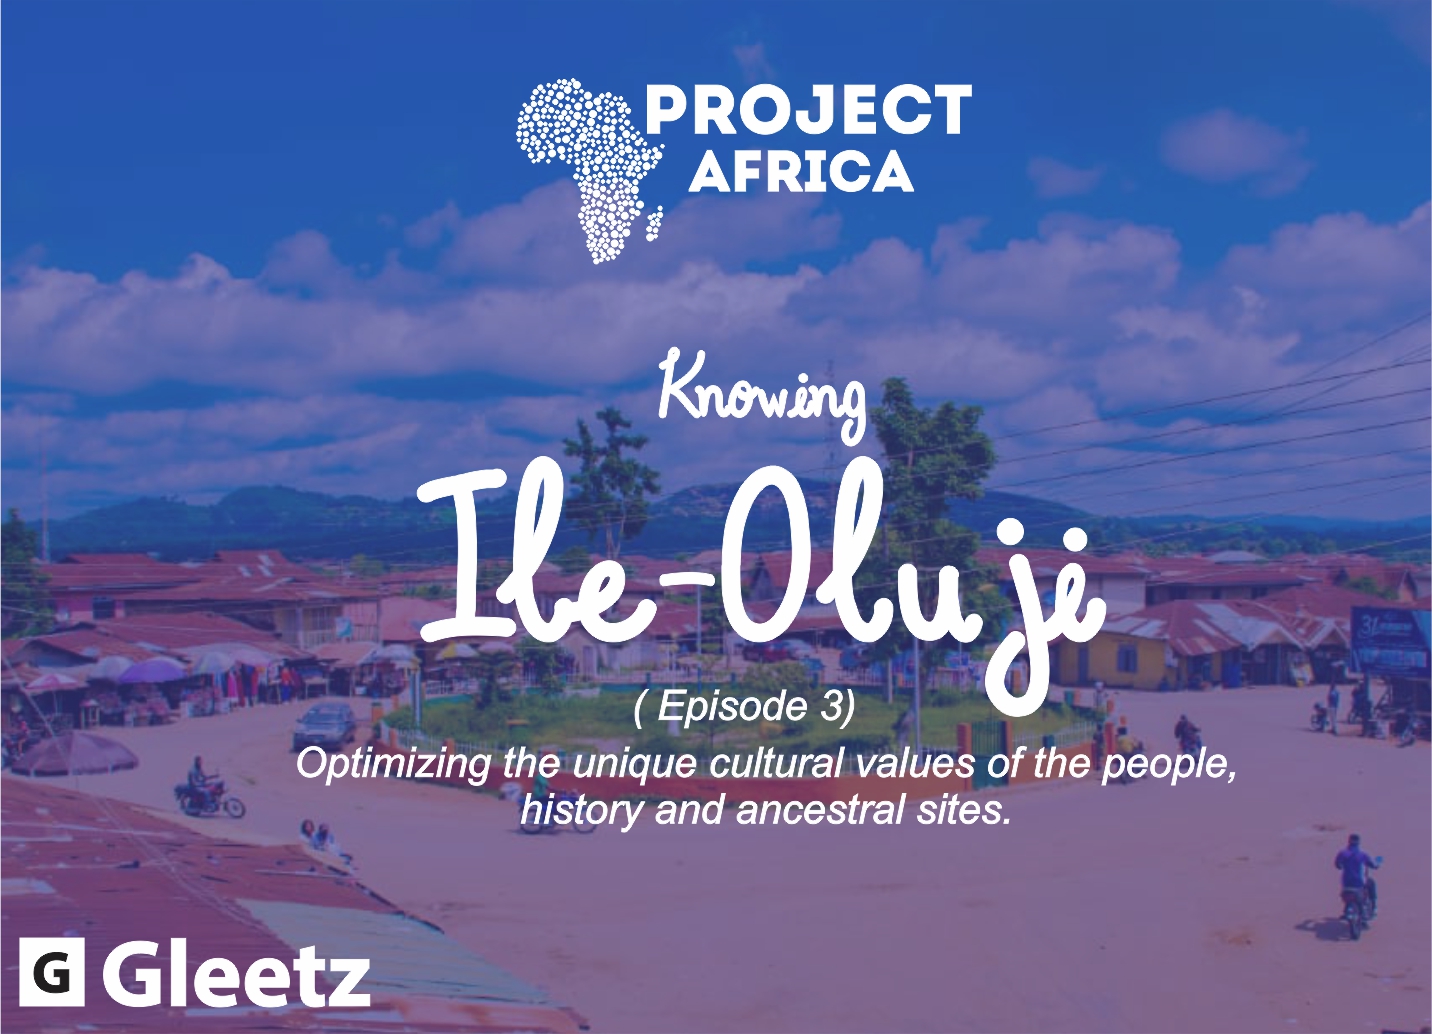 PROJECT AFRICA: Knowing Ile-Oluji. (Episode 3)